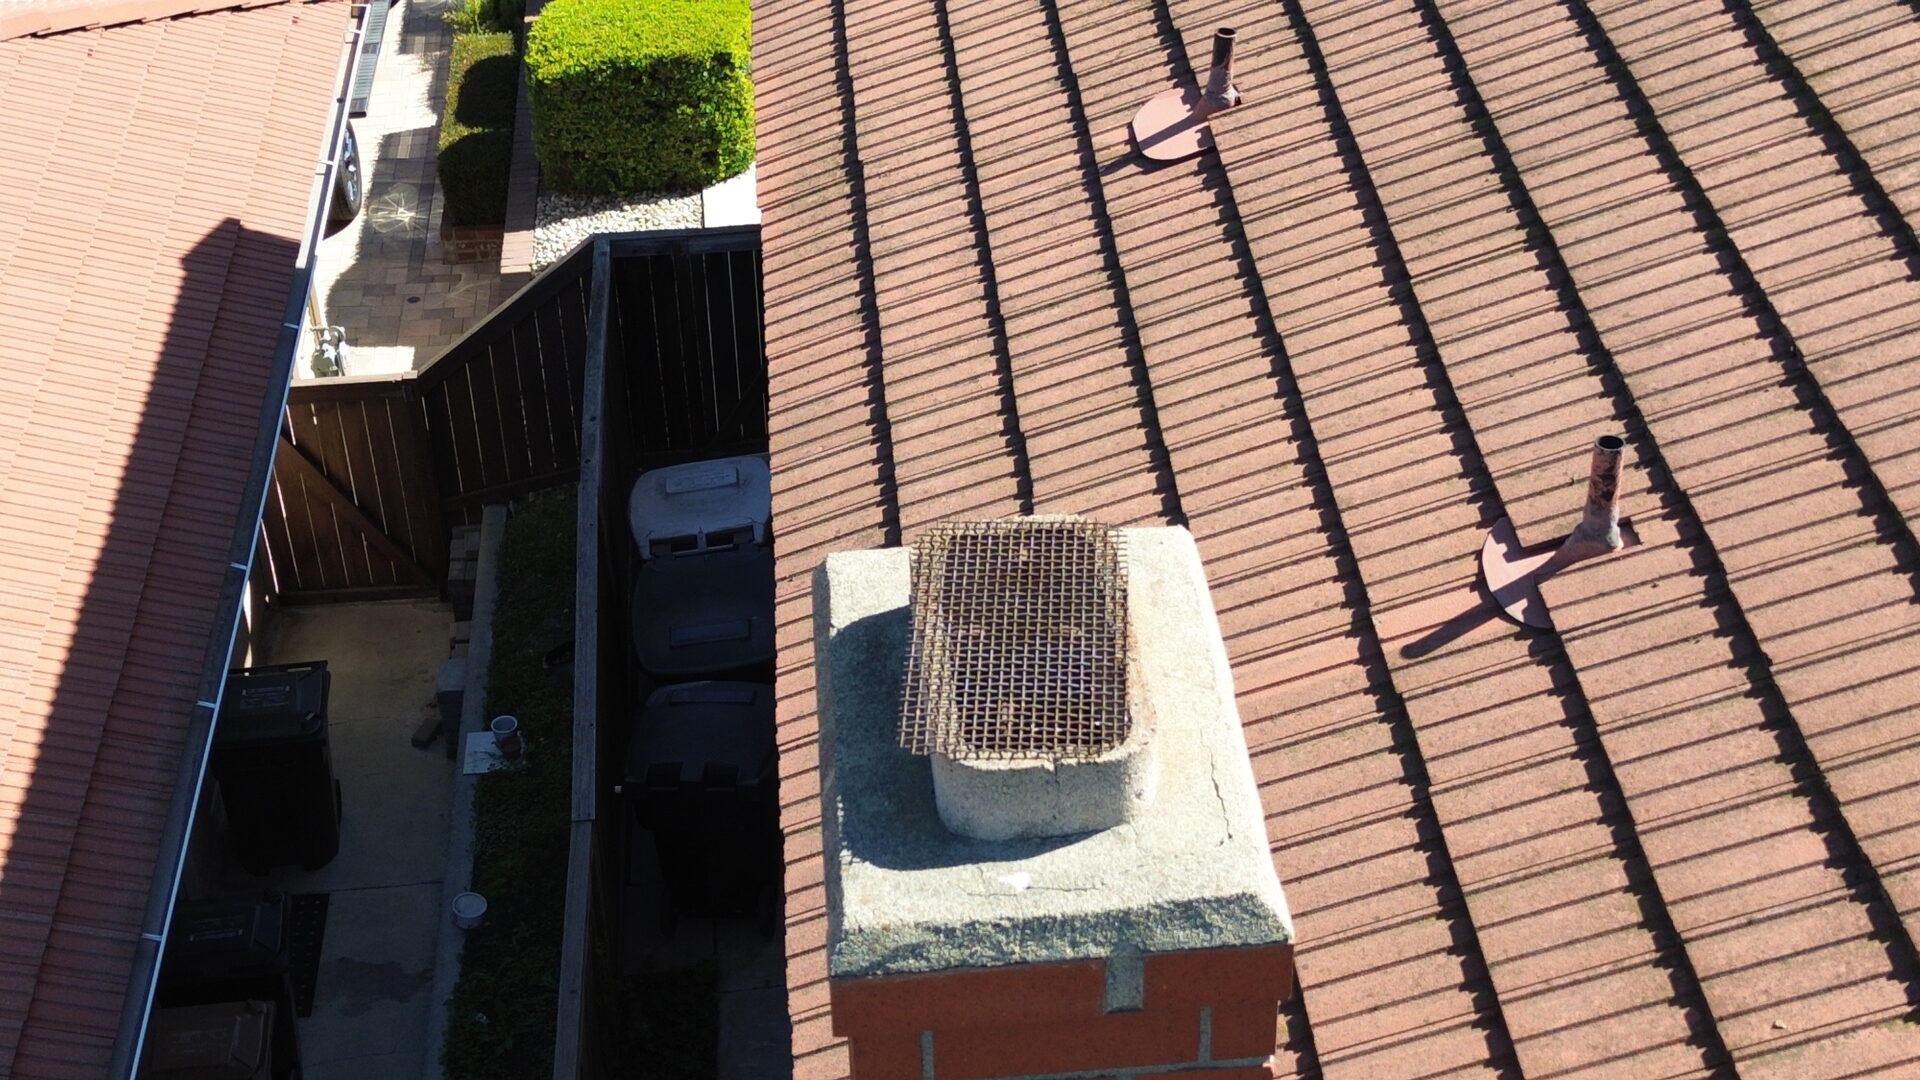 chimney inspection services in orange county ca